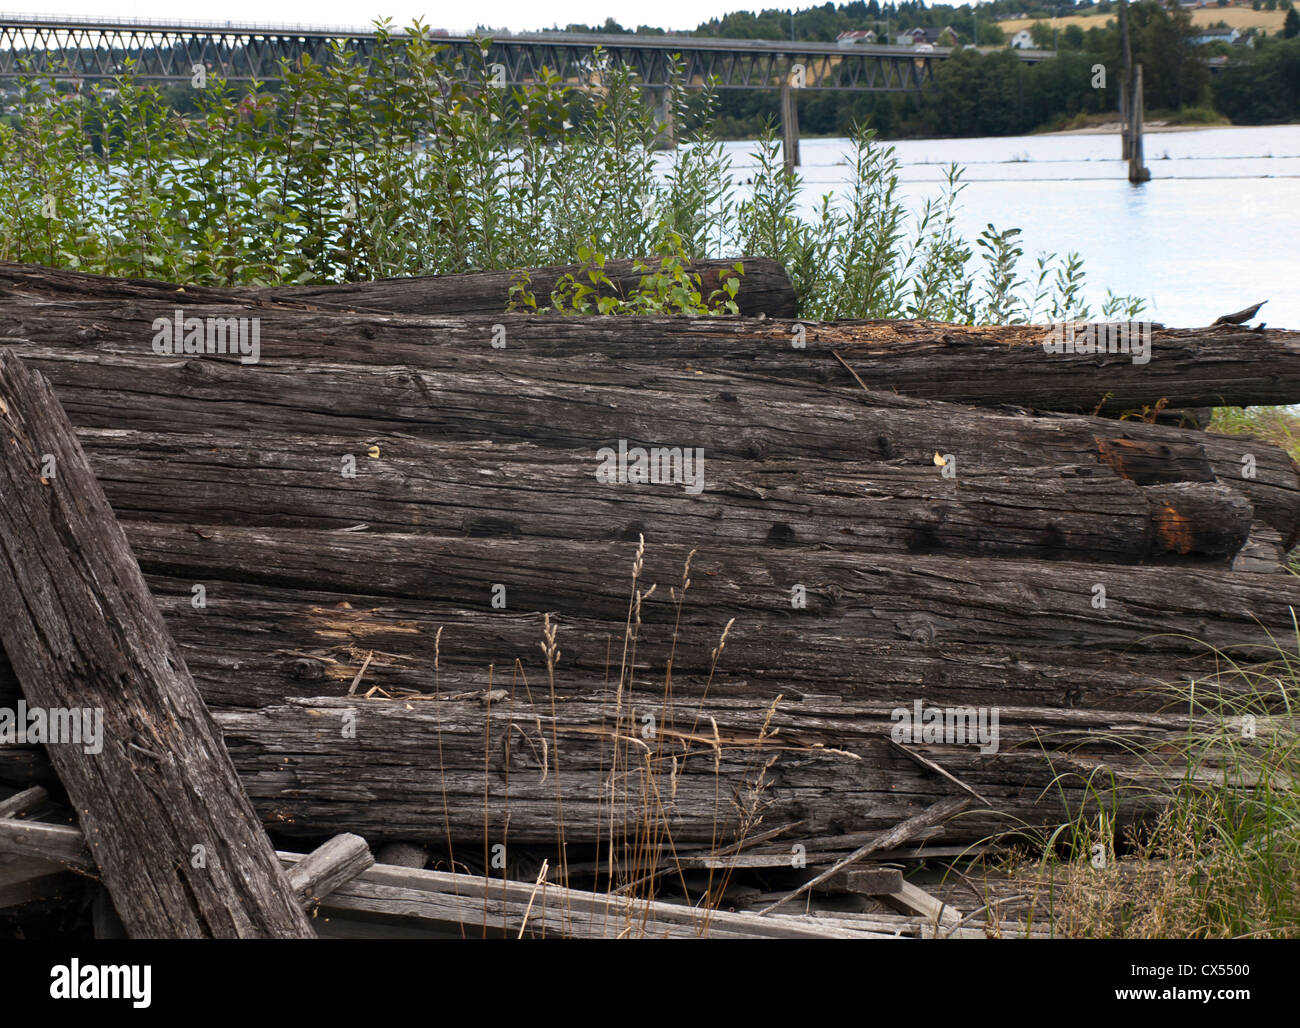 Old decaying logs in the Fetsund lense museum dedicated to  log driving, Norways longest river Glomma seen in background Stock Photo